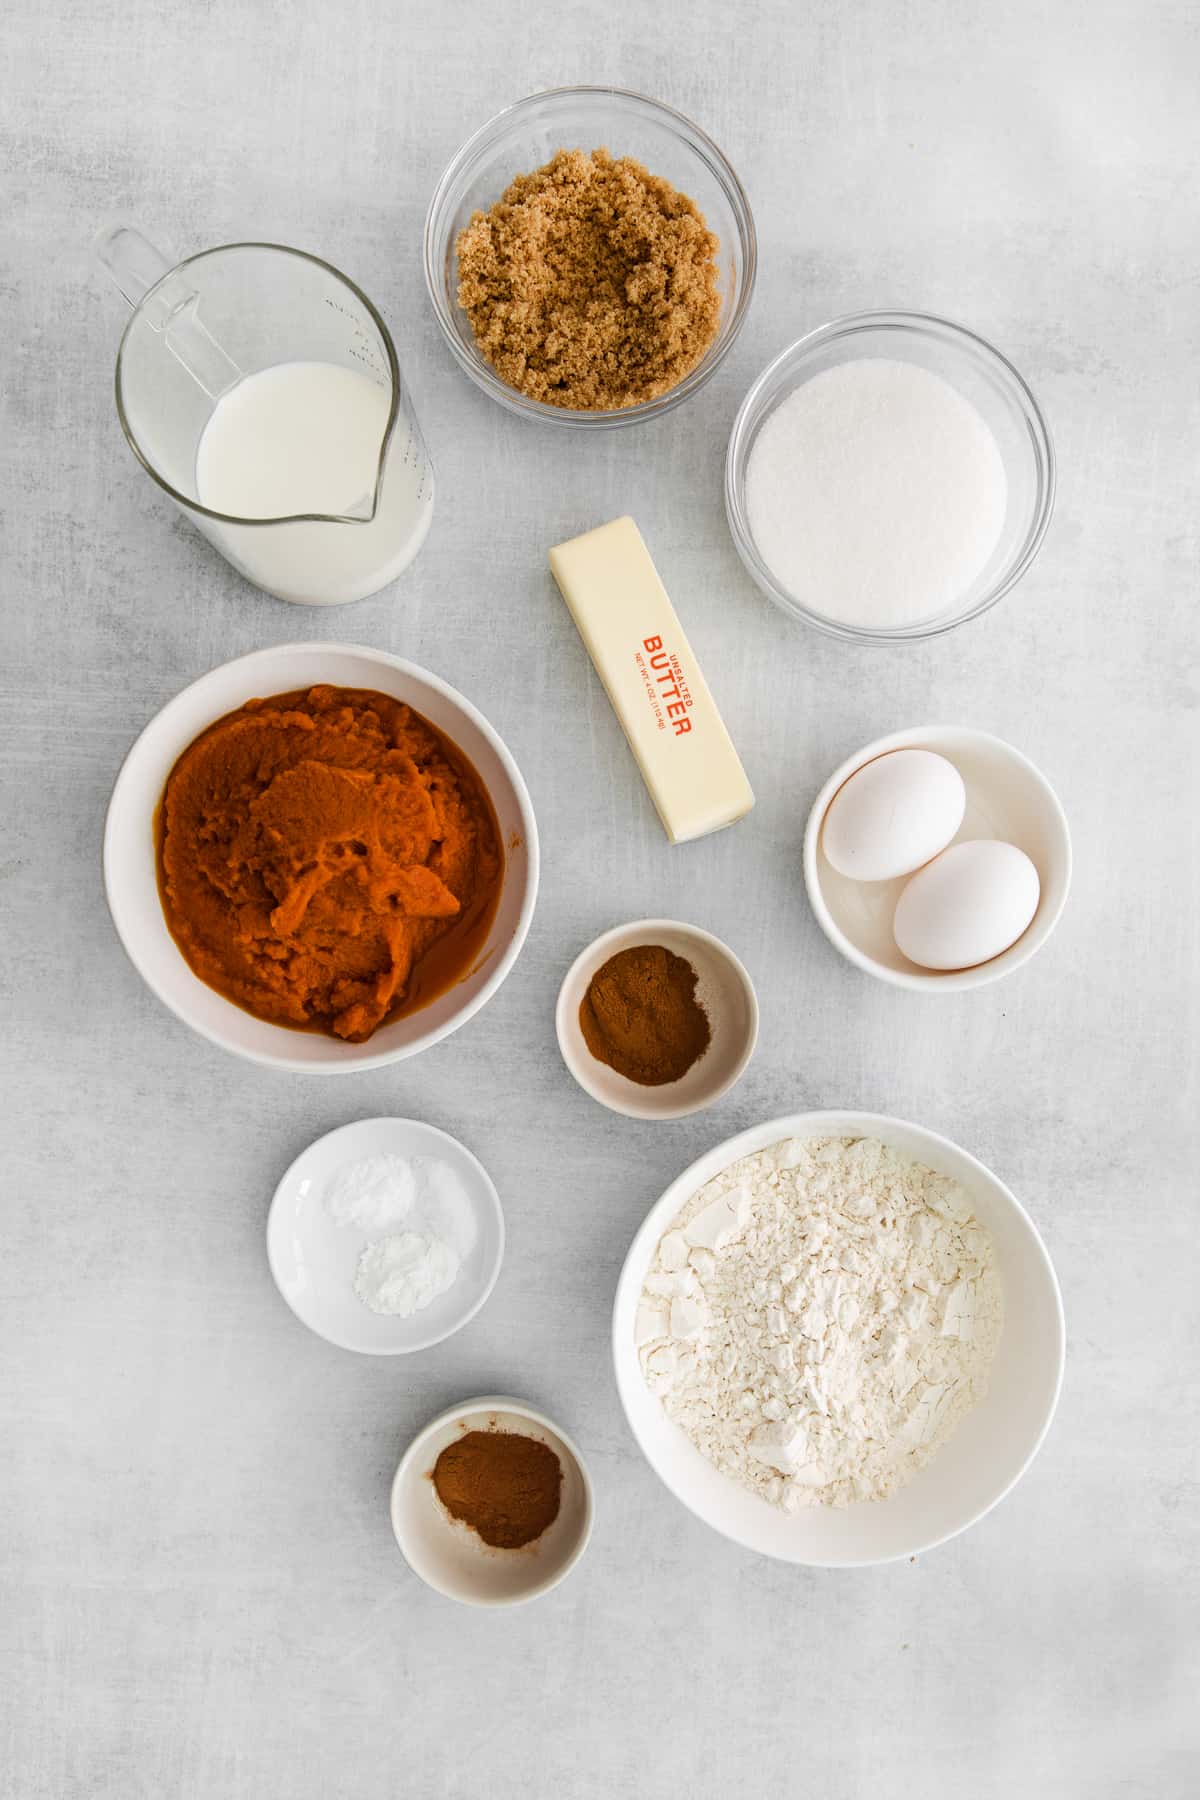 Ingredients for pumpkin bars with cream cheese frosting in bowls.